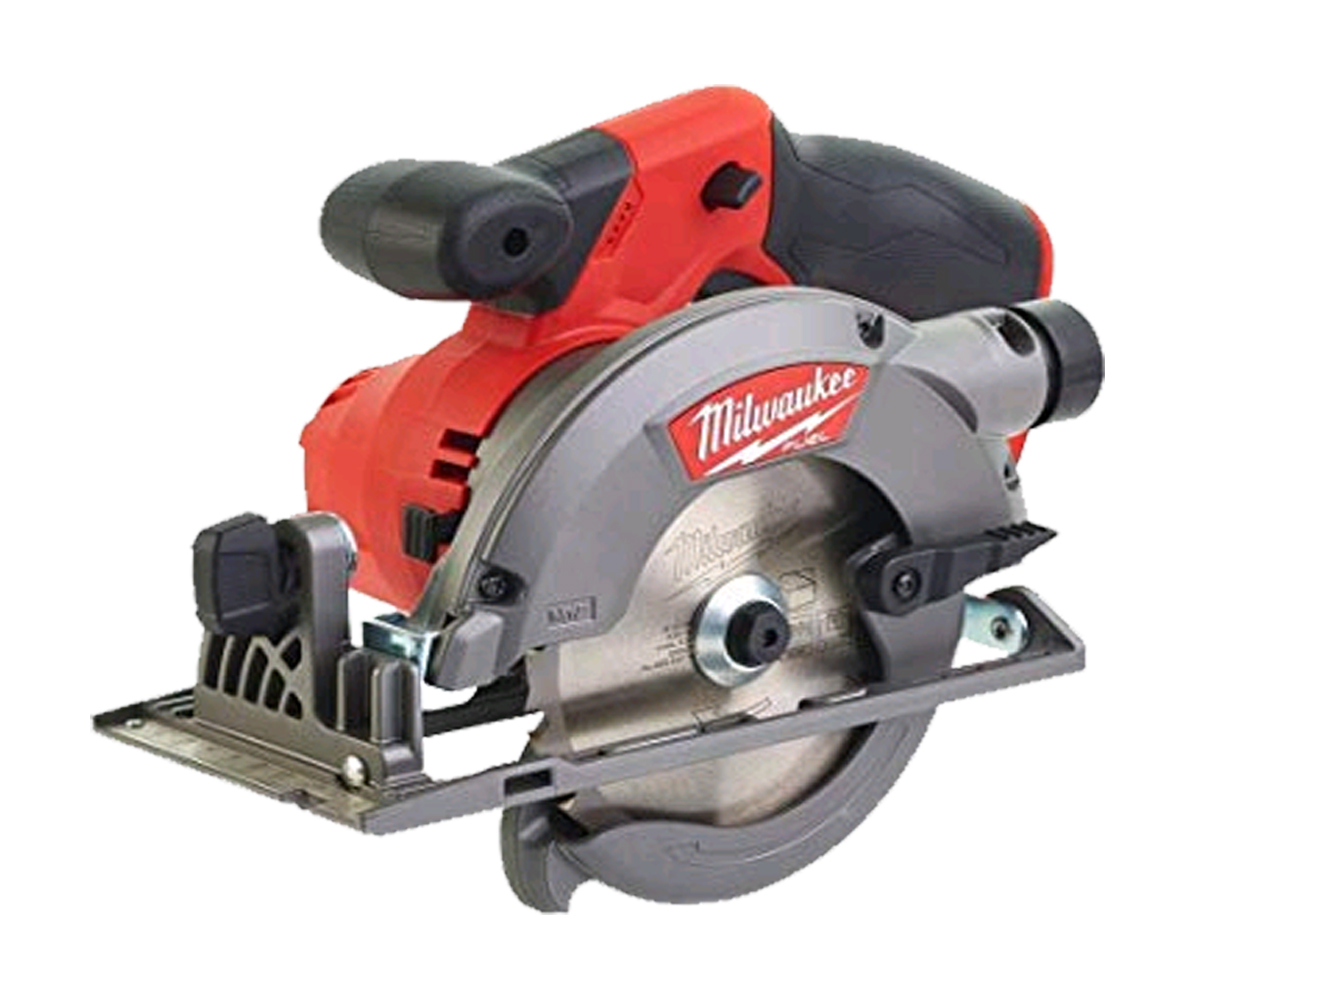 Milwaukee M12CCS44 12V Sub Compact 140mm (44mm) Circular Saw Brushless - Body Only